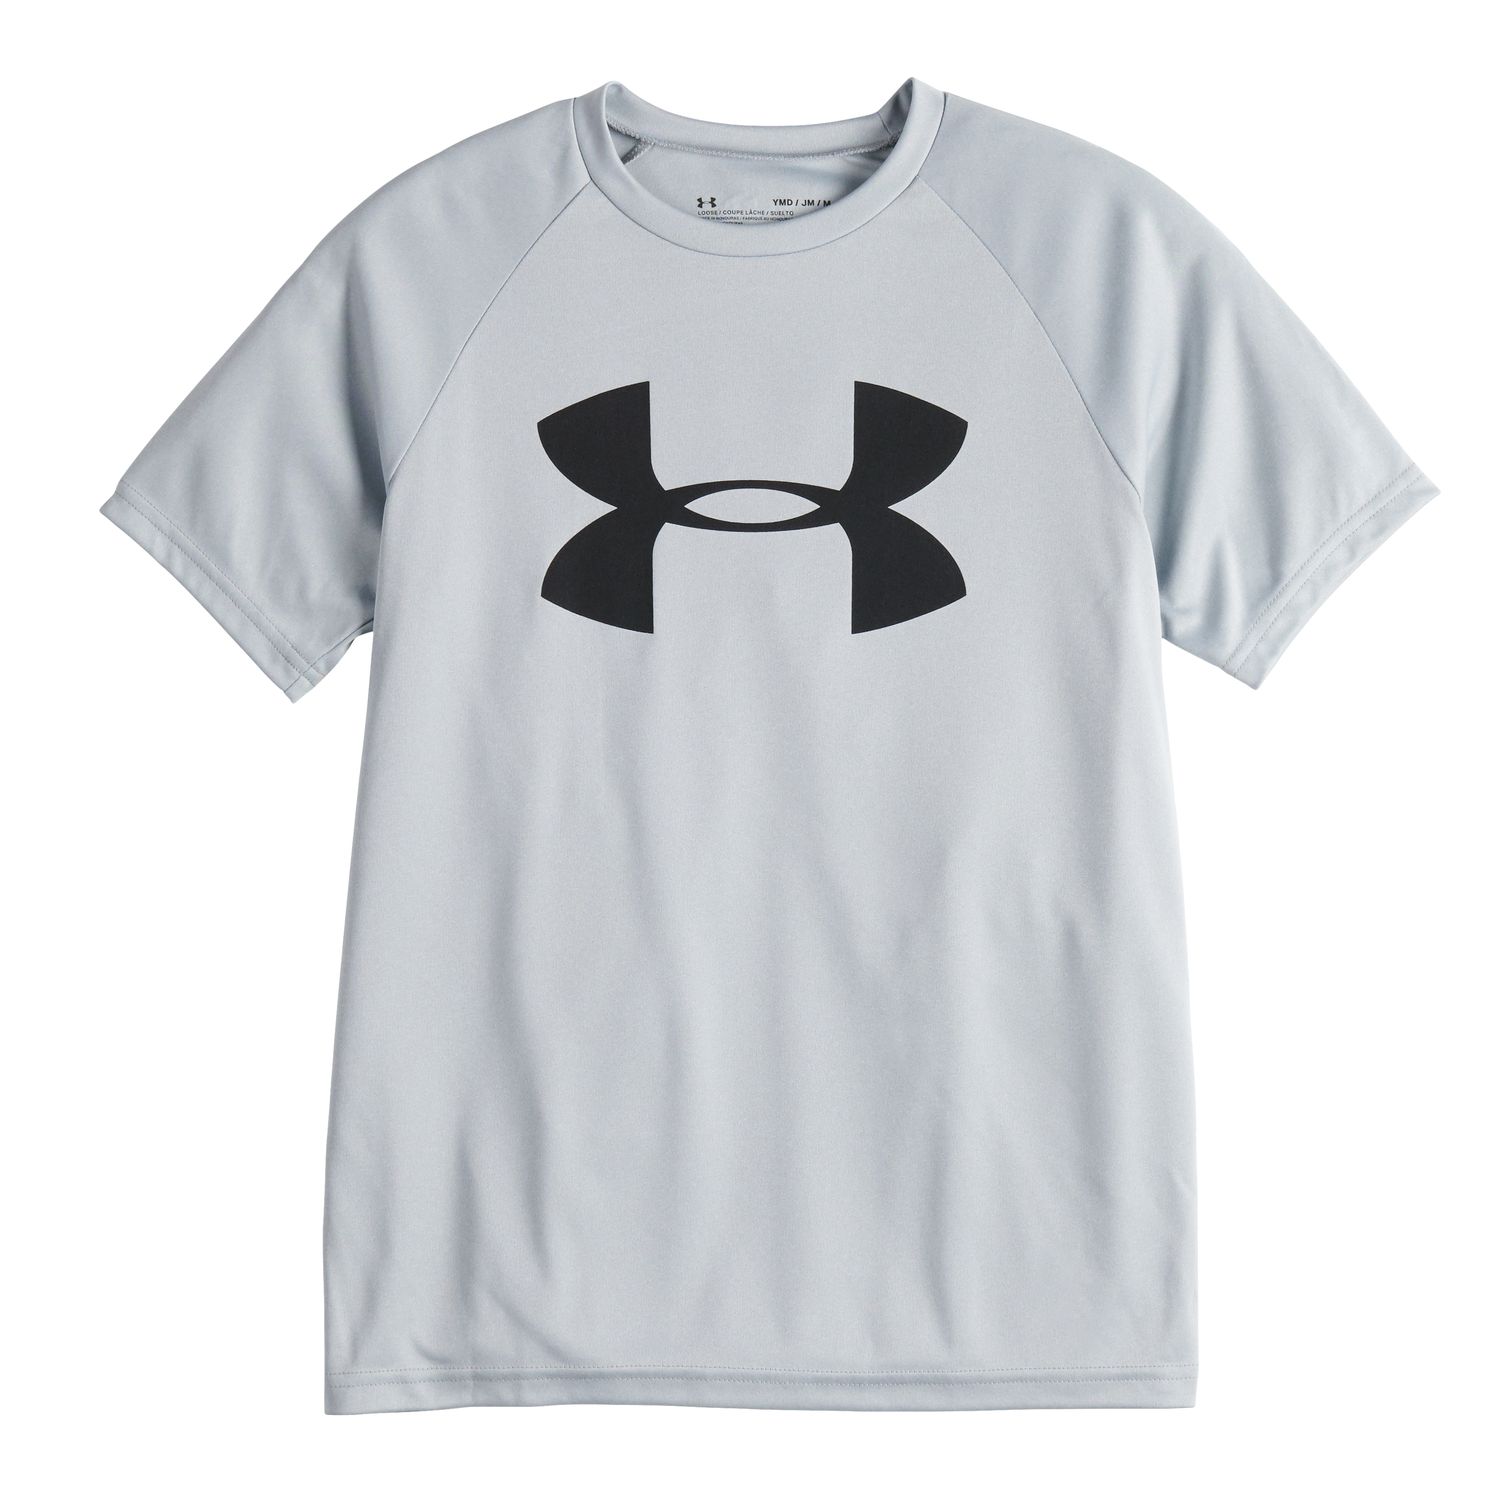 Under Armour Boys White This Is My Game Dry Fit Top Size 2T 5 